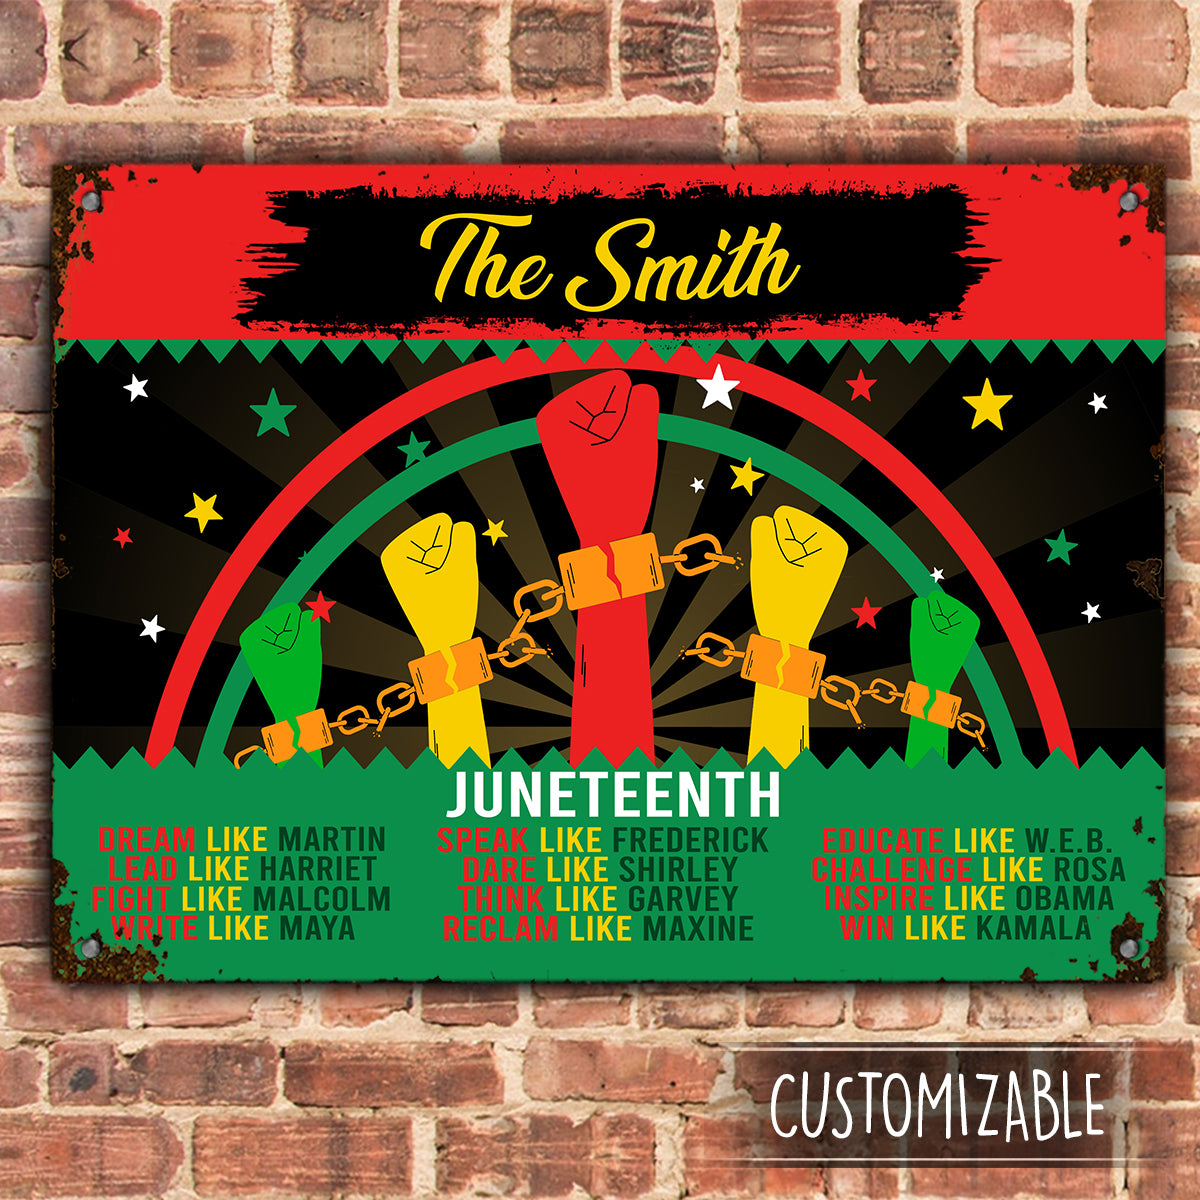 Juneteenth Famous Black Figures Personalized Metal Sign